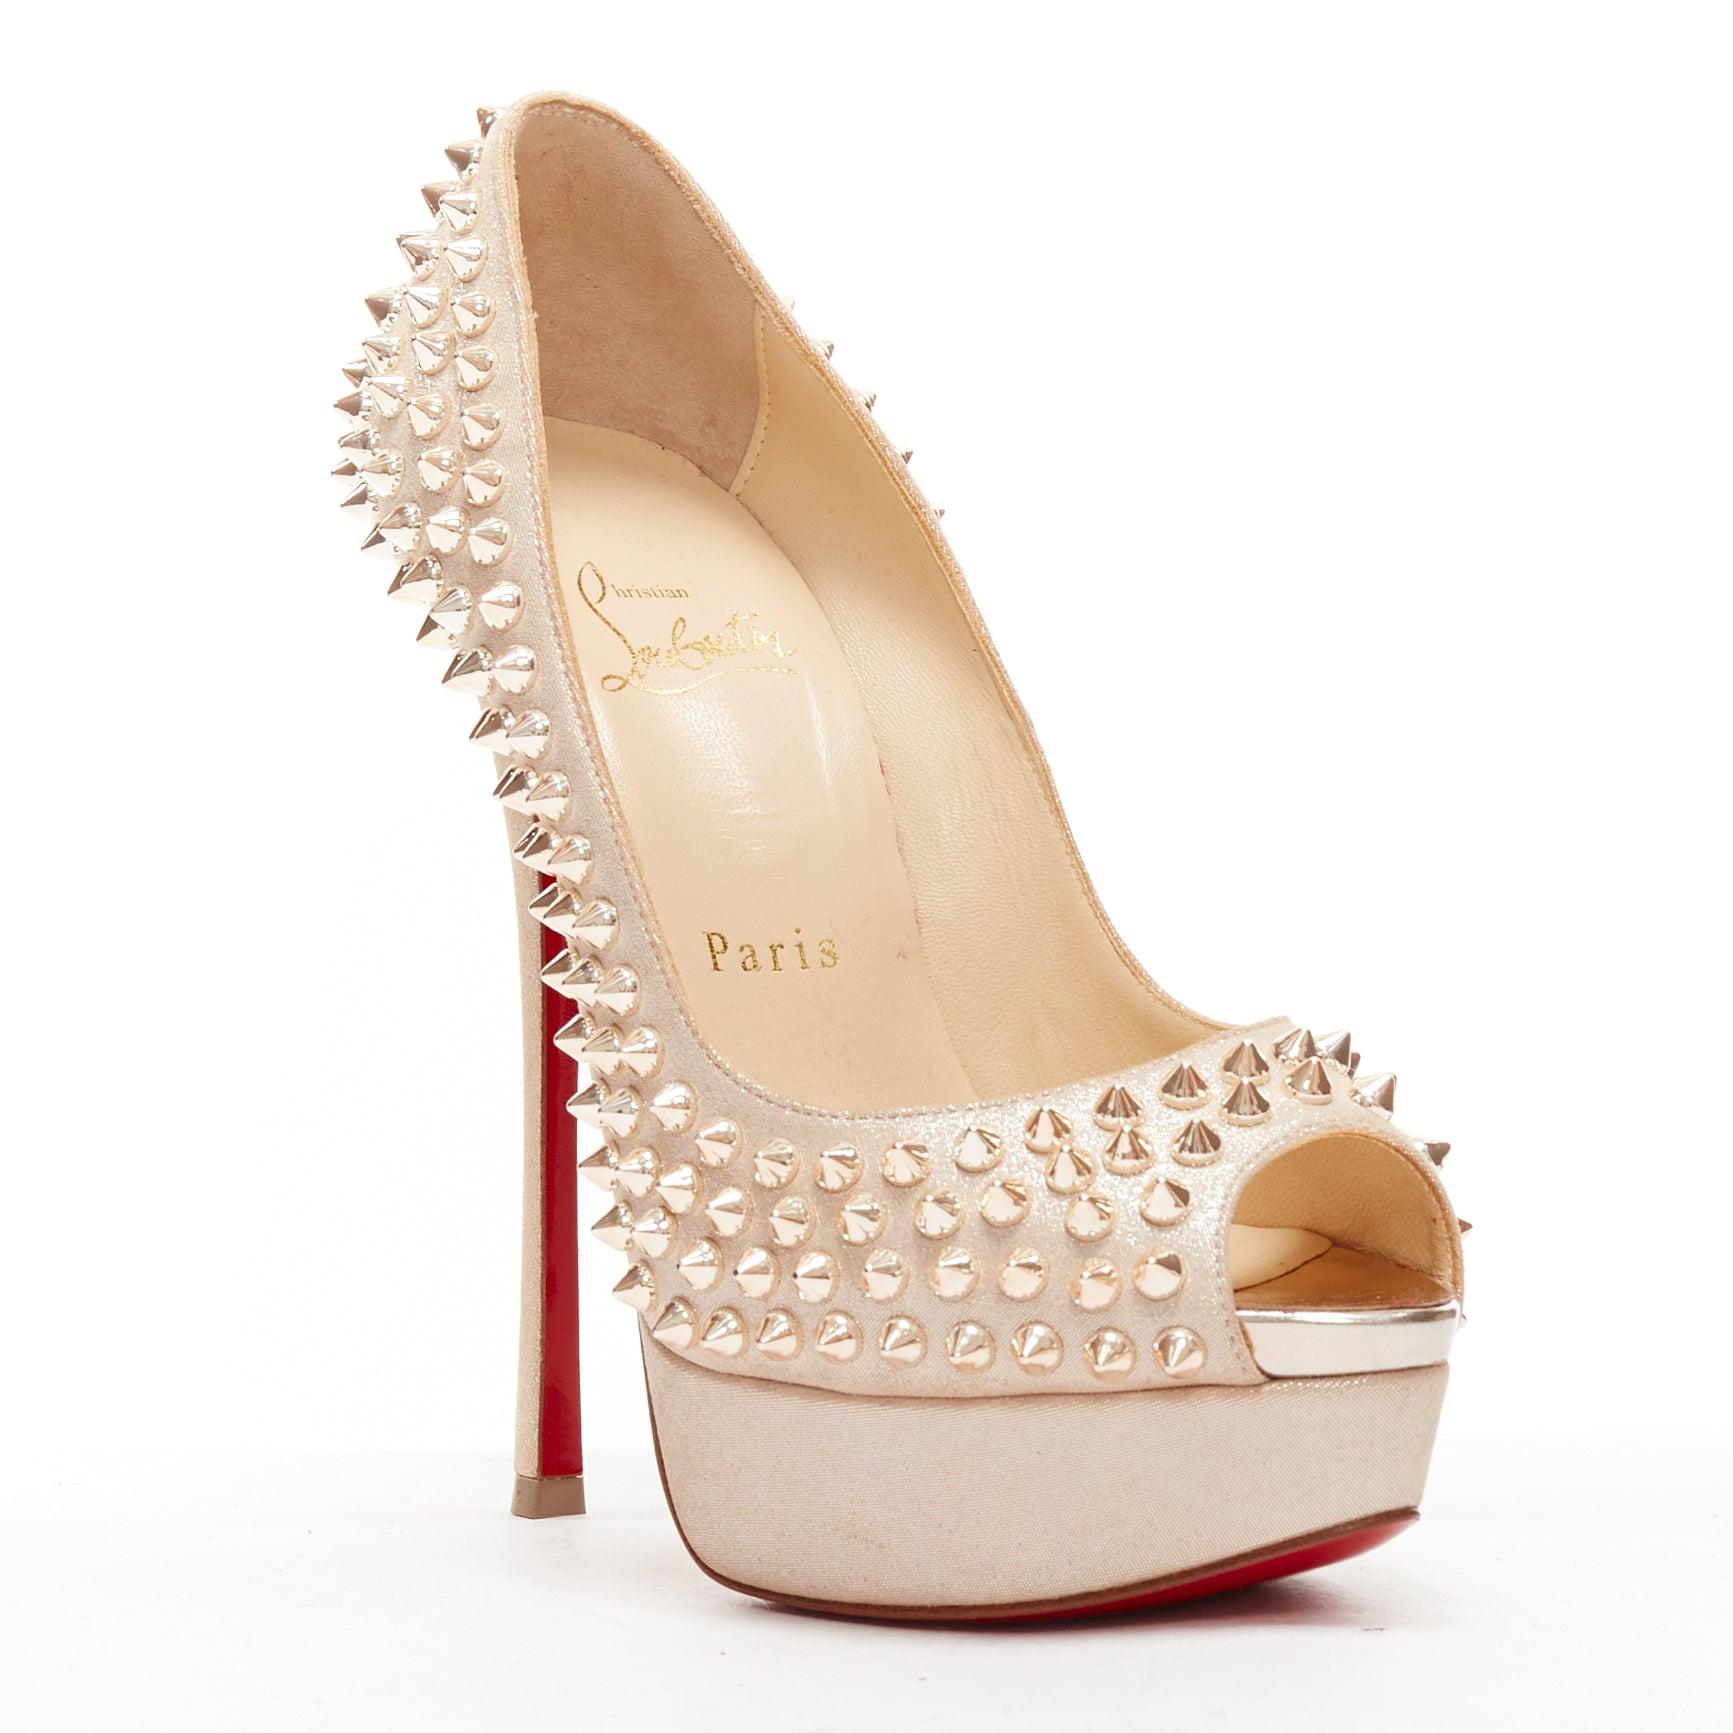 rare CHRISTIAN LOUBOUTIN Fetish Lady Peep 150 gold spike platform pump EU36.5
Reference: TGAS/D00524
Brand: Christian Louboutin
Model: Fetish Lady Peep 150
Material: Leather
Color: Gold
Pattern: Solid
Closure: Slip On
Lining: Nude Leather
Made in: